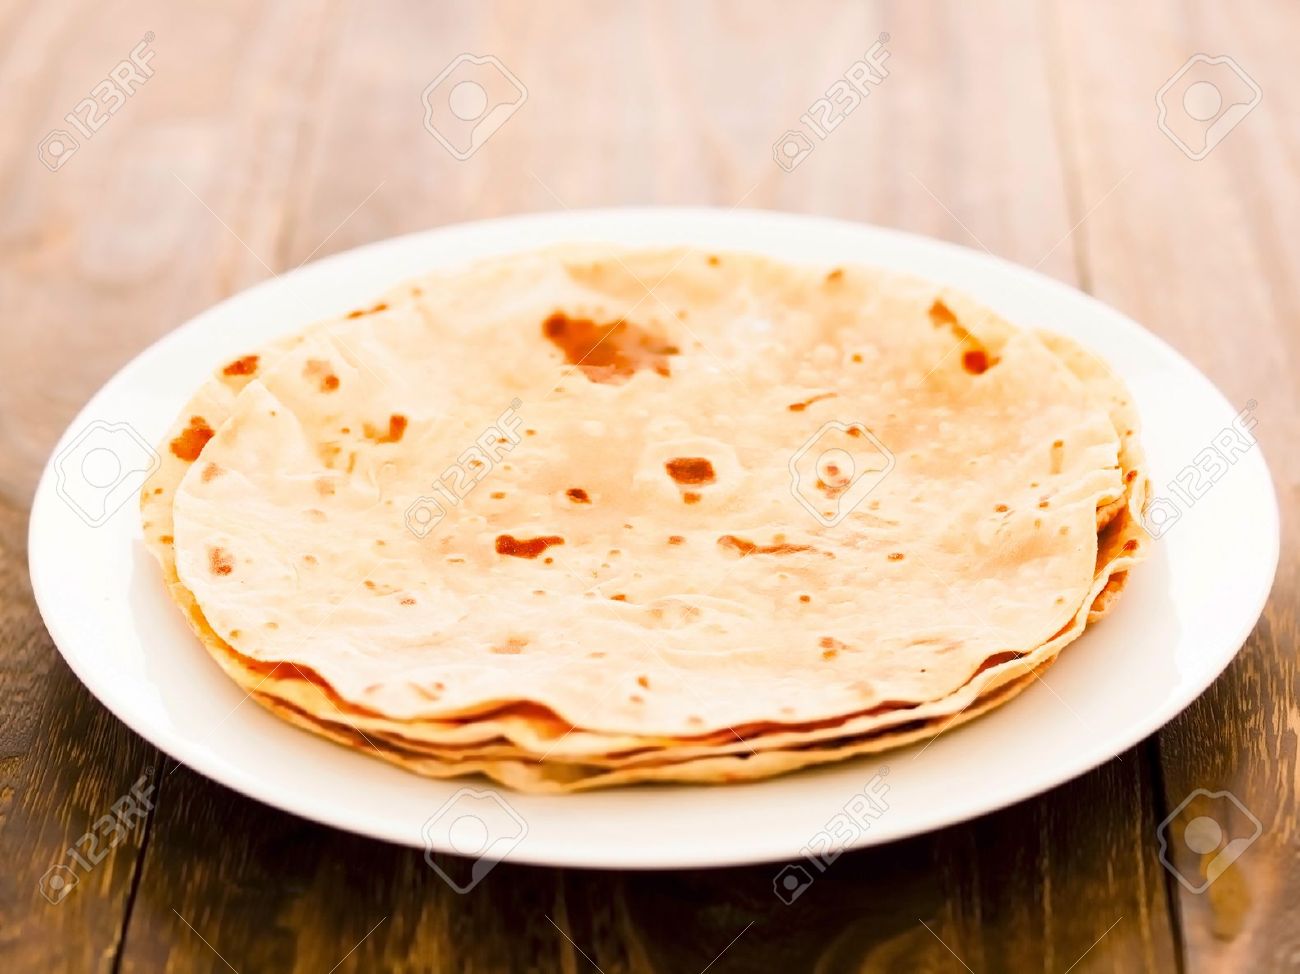 13605588-close-up-of-a-plate-of-indian-chapati-bread-stock-photo-chapati